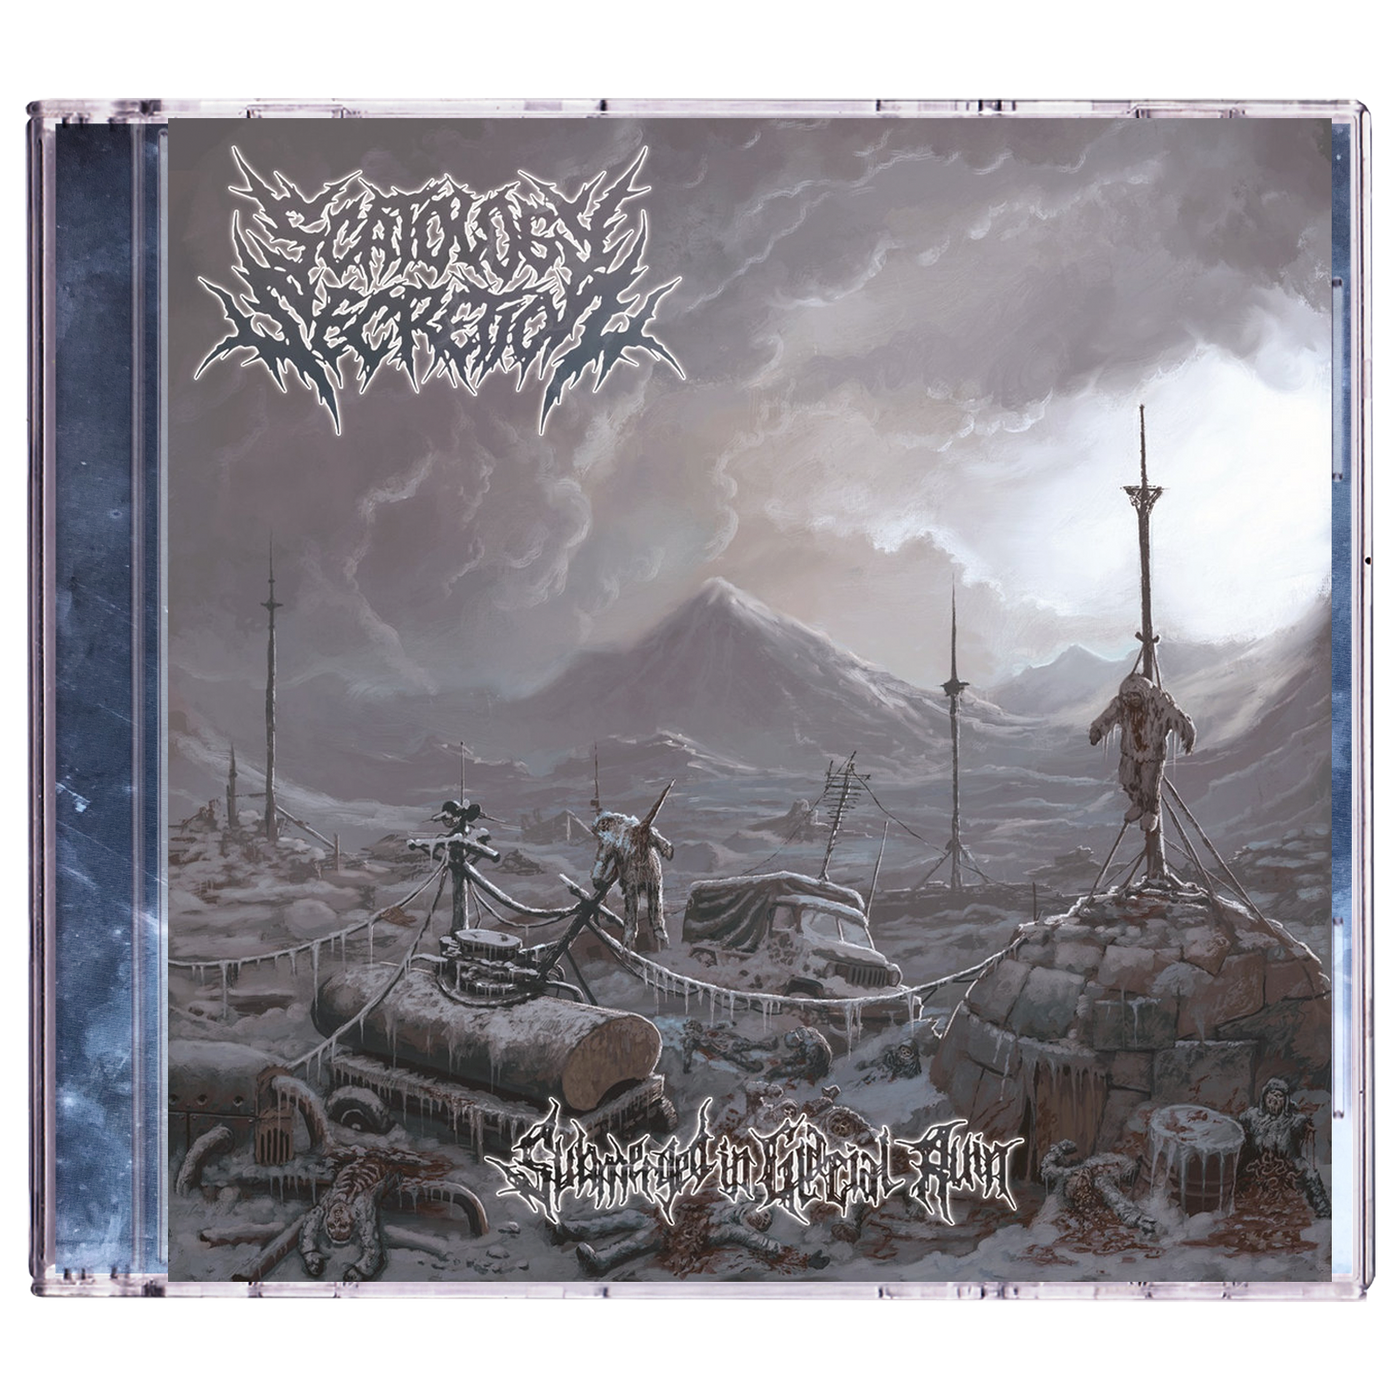 Scatology Secretion 'Submerged In Glacial Ruin' CD